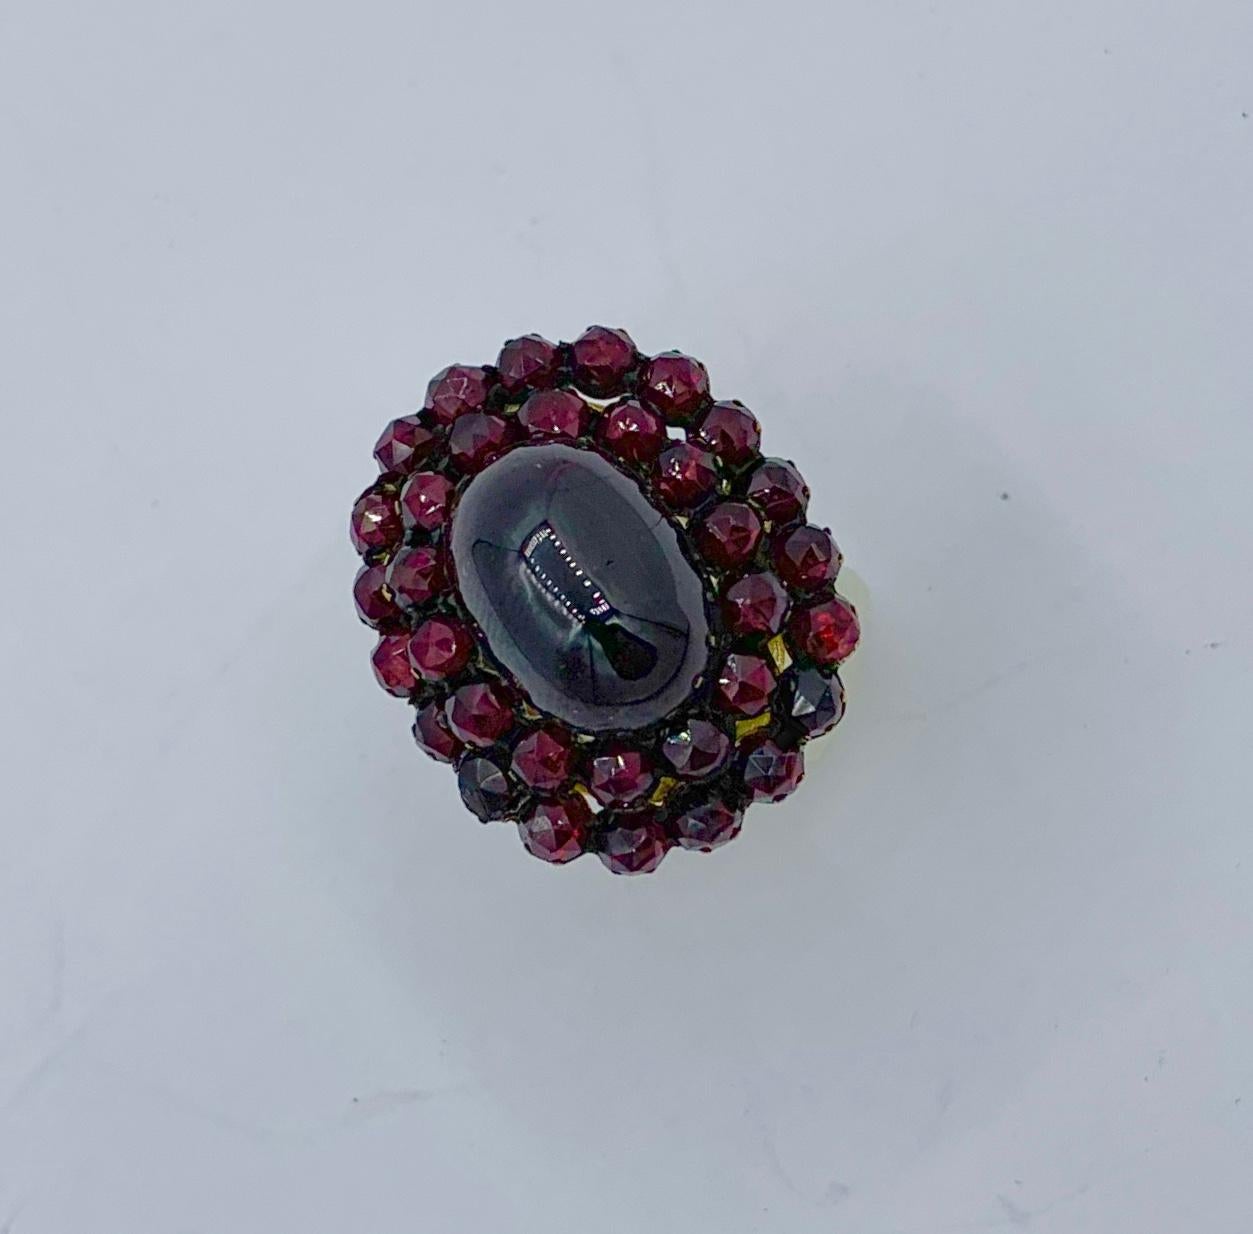 This is one of the finest Belle Epoque - Victorian Bohemian Garnet Rings have seen.  The fabulous ring is adorned with a magnificent Garnet Cabochon of approximately 8 Carats.  The tall Garnet cabochon has exquisite blood red color, a sensual shape